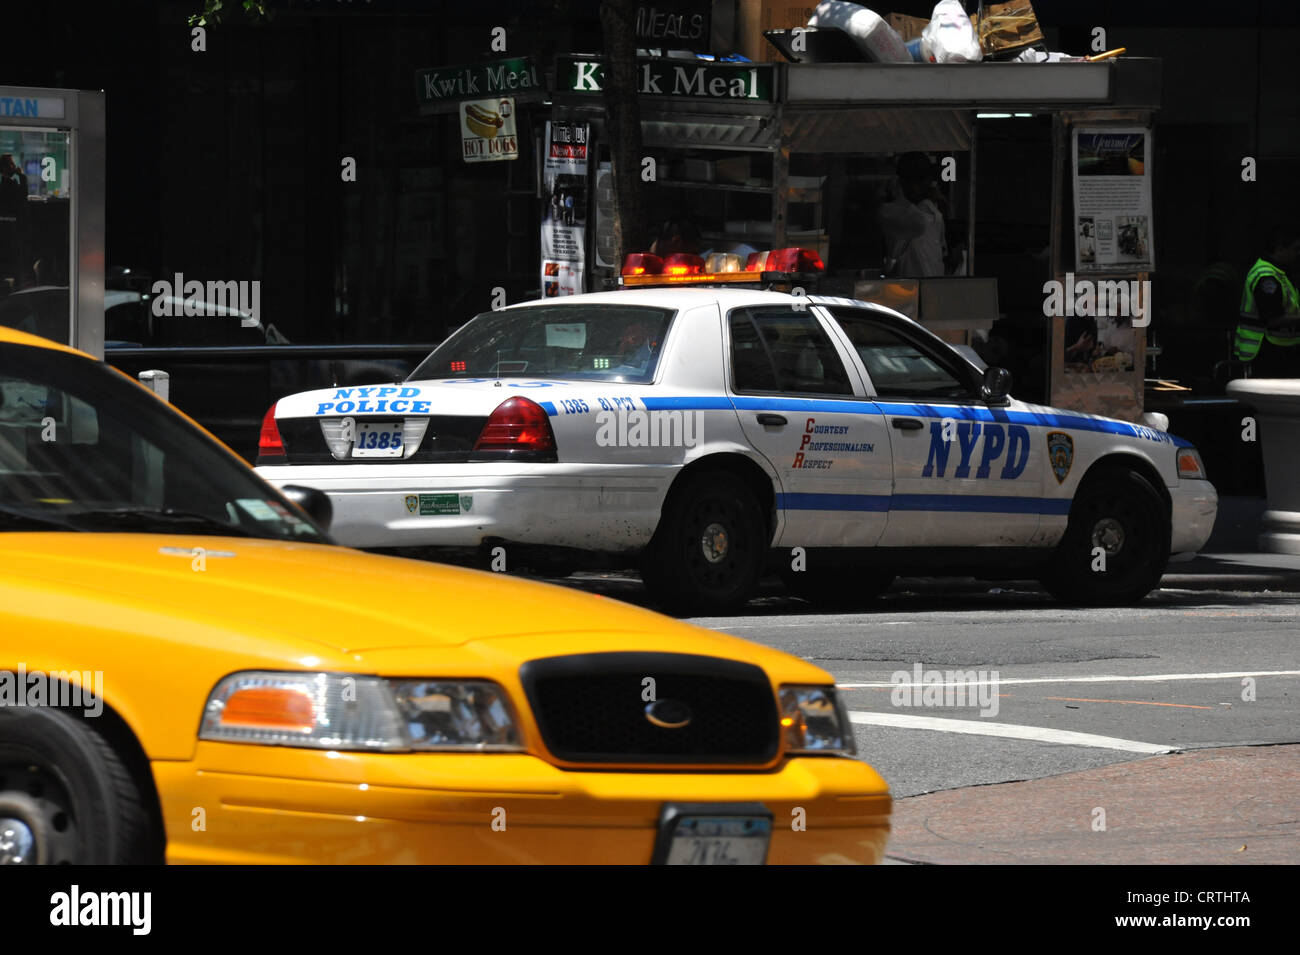 New York cab et New York police car Banque D'Images